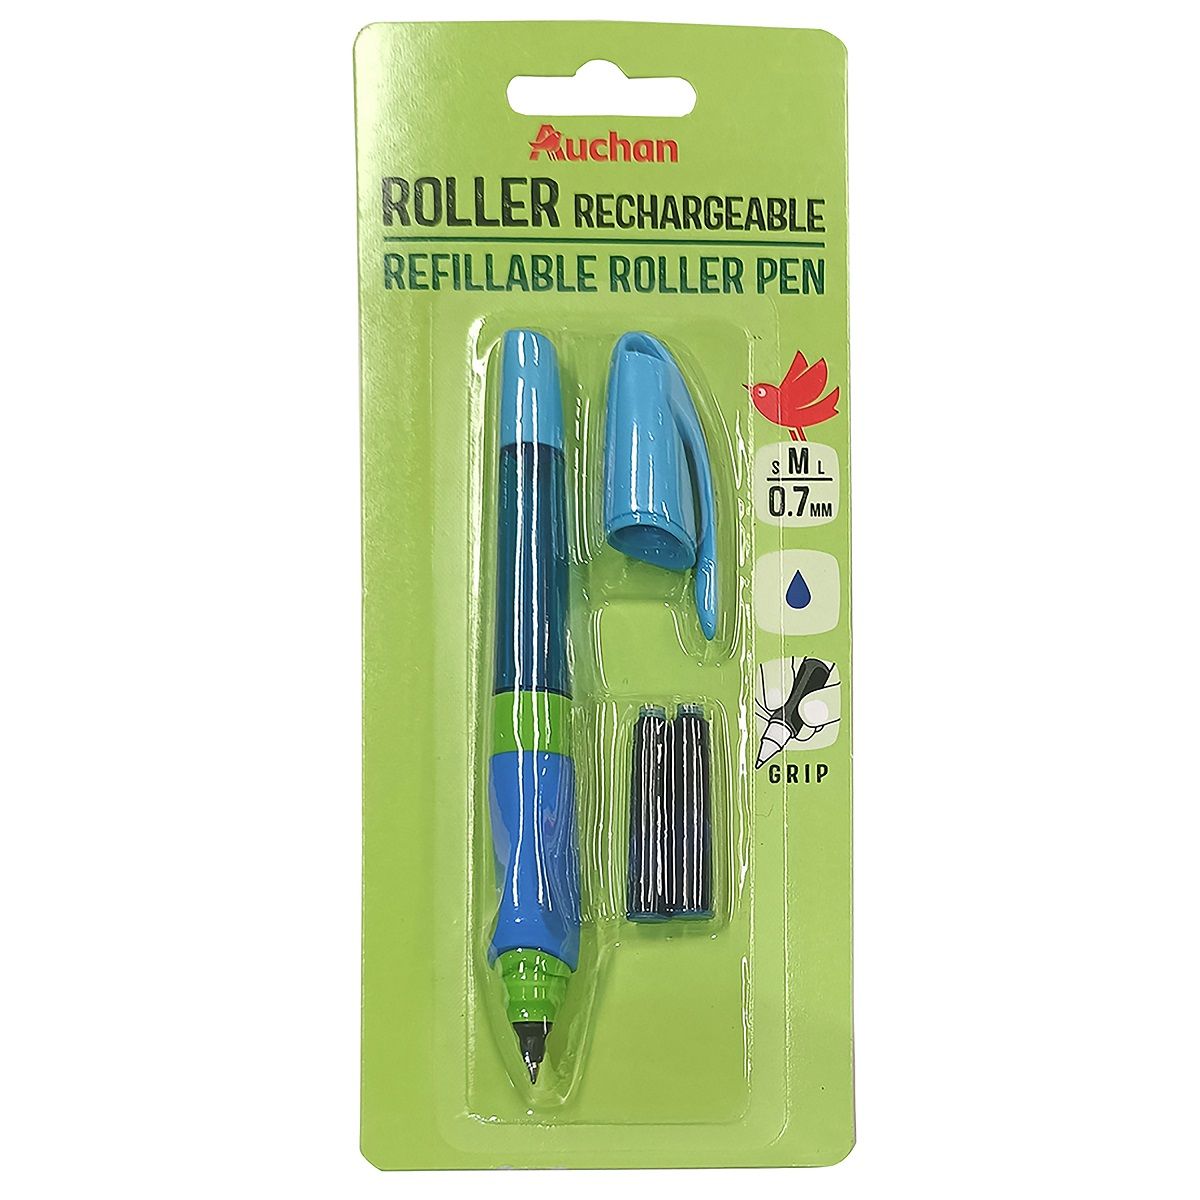 Stylo roller à cartouche pointe moyenne 0,7mm